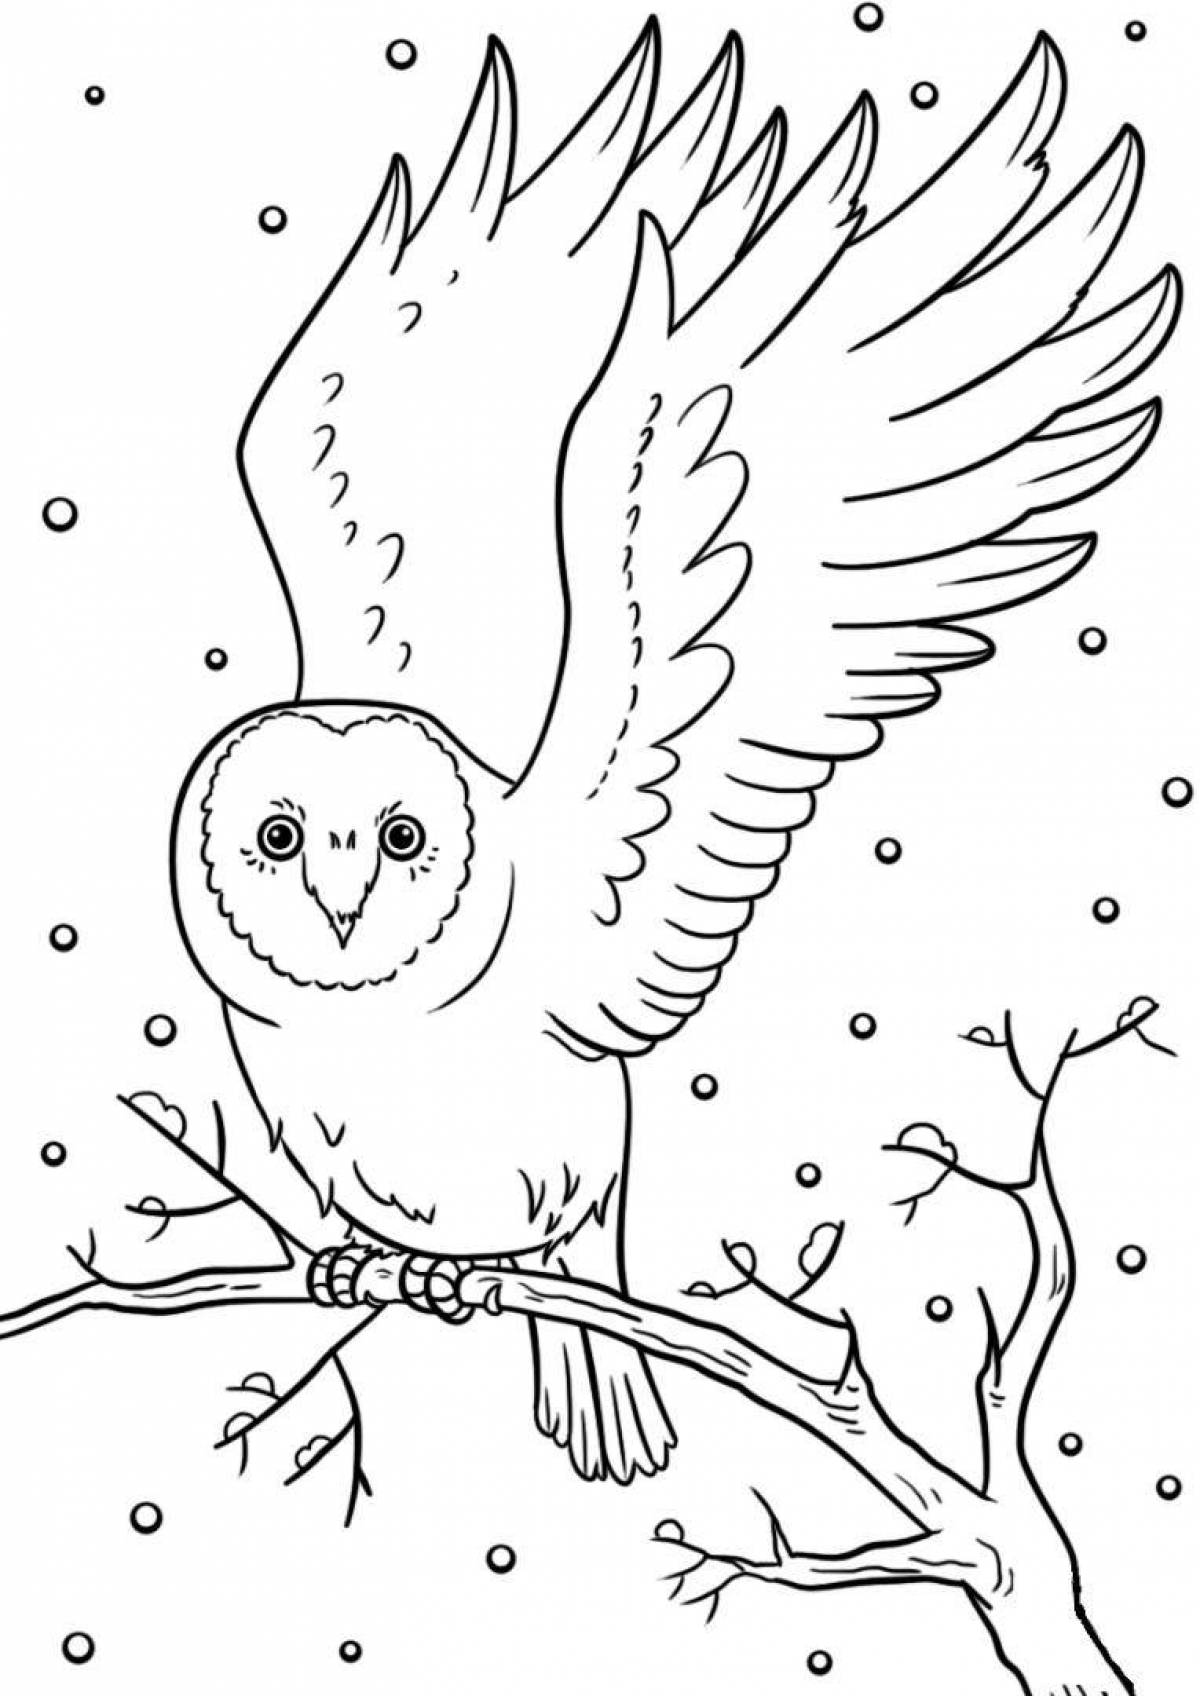 Outstanding winter bird coloring book for 2-3 year olds